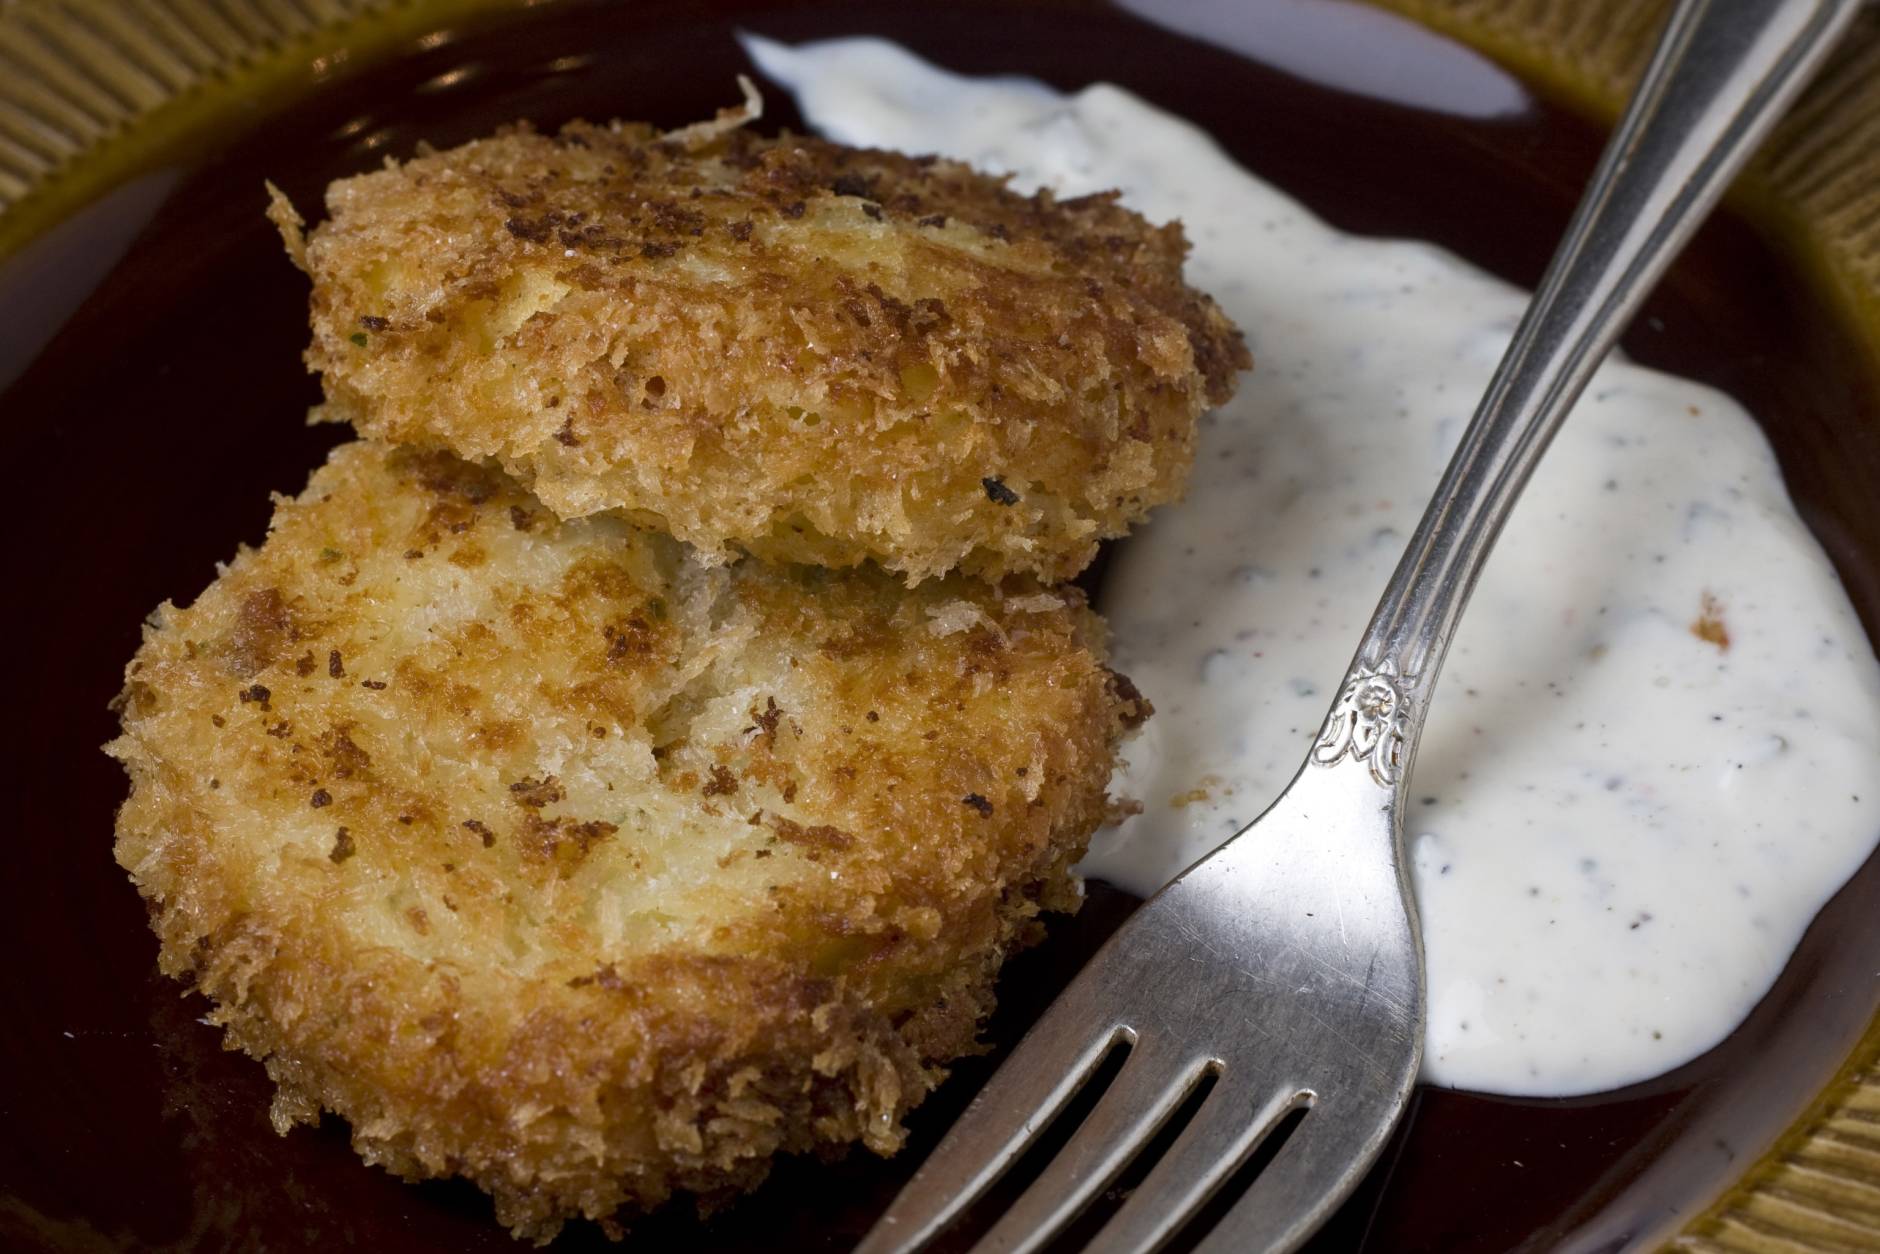 This photo taken Nov. 4, 2009 shows a  fried potato pancake.  Don't just reheat that bowl of leftover mashed potatoes day after day this year. Fried potato pancakes made from that Thanksgiving leftover, with a little cheese and bacon added, gives you an entirely new and satisfying taste. (AP Photo/Larry Crowe)